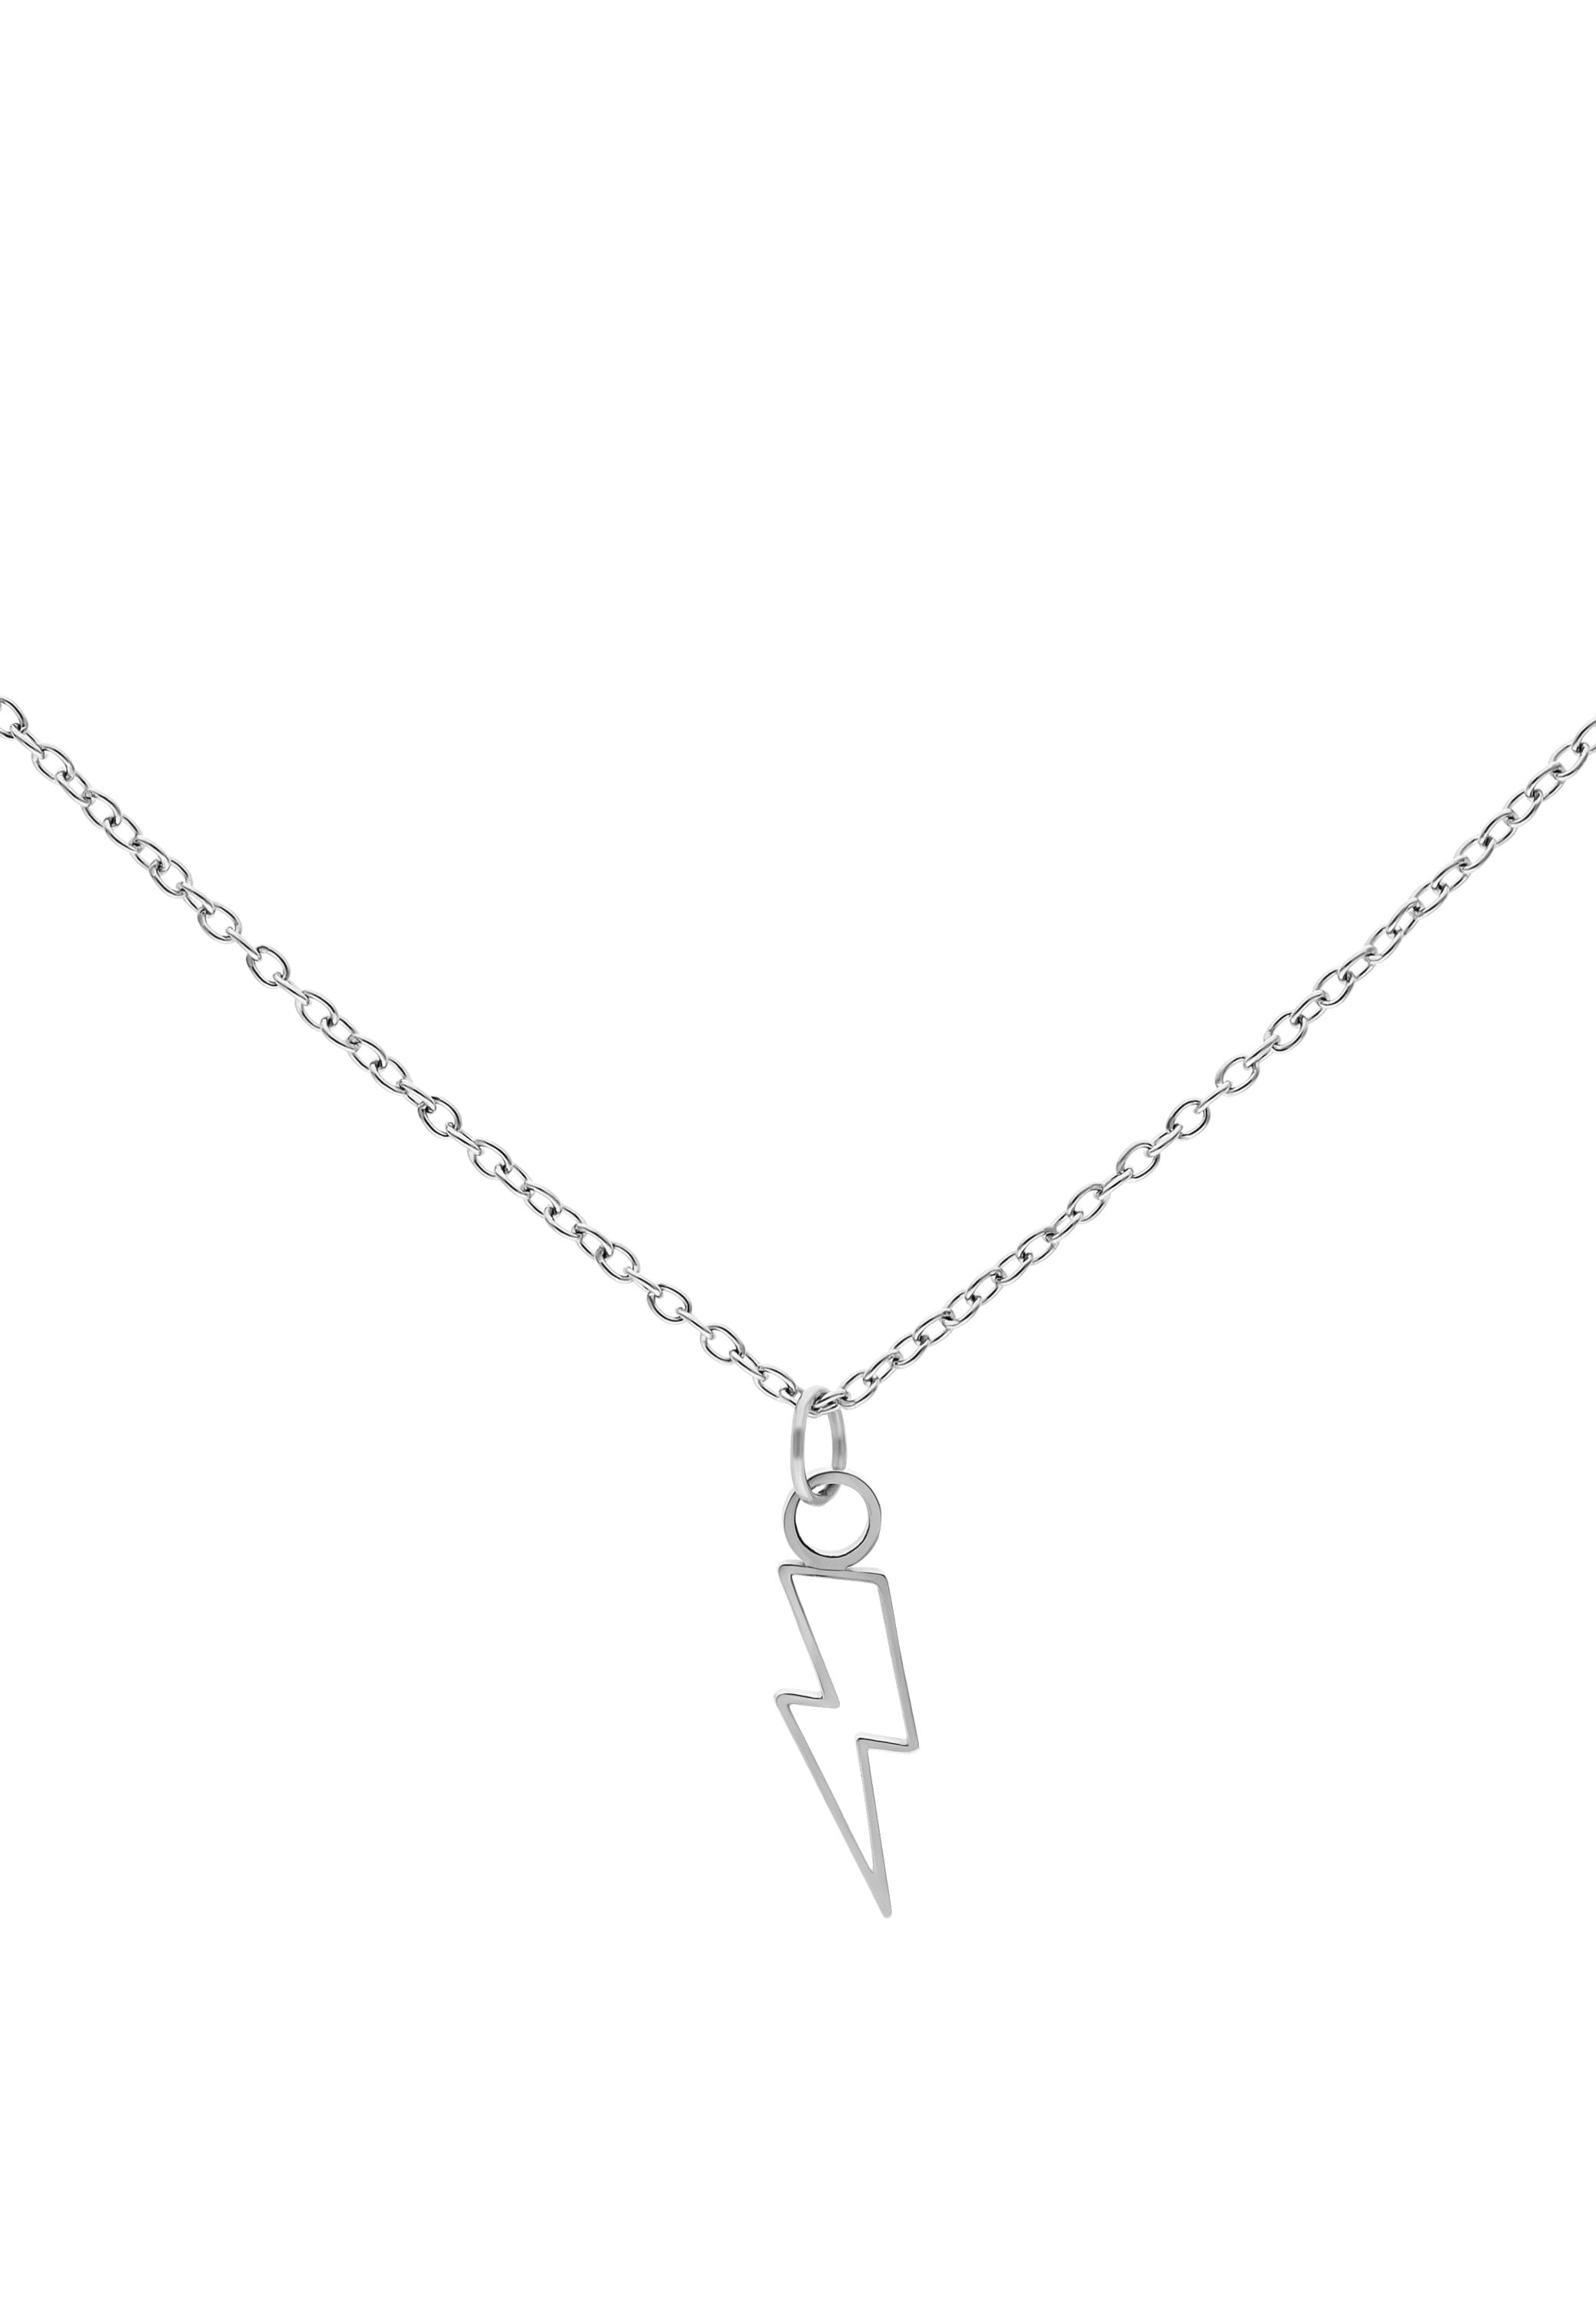 Wildcat - Flash Silver - Necklace